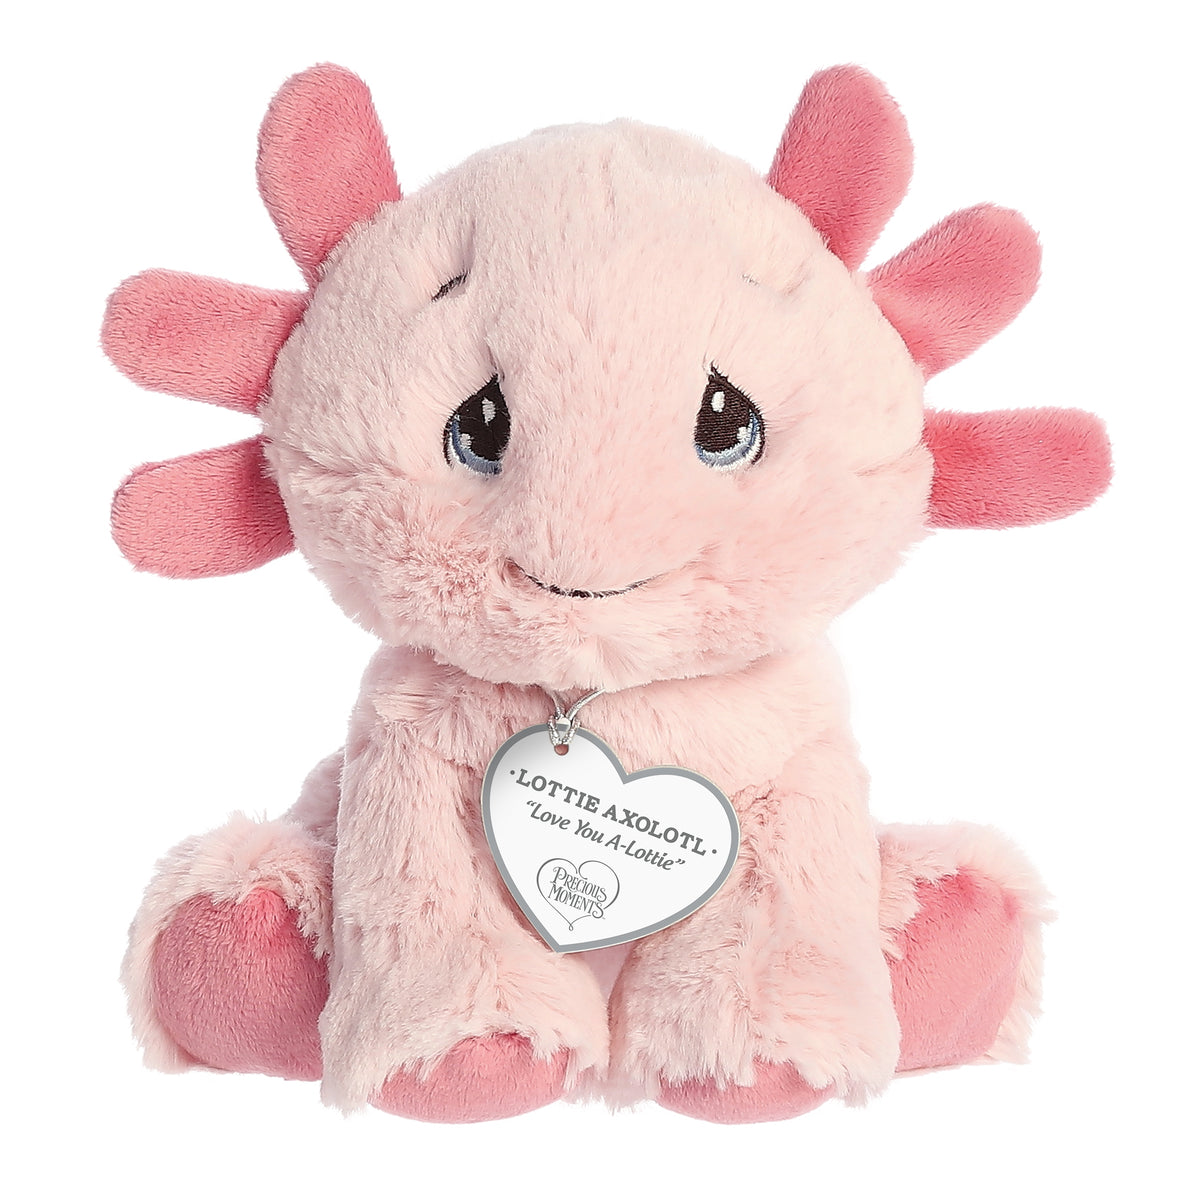 A sitting-down pink axolotl plush with tear-drop eyes and a precious moments inspirational tag around its neck.